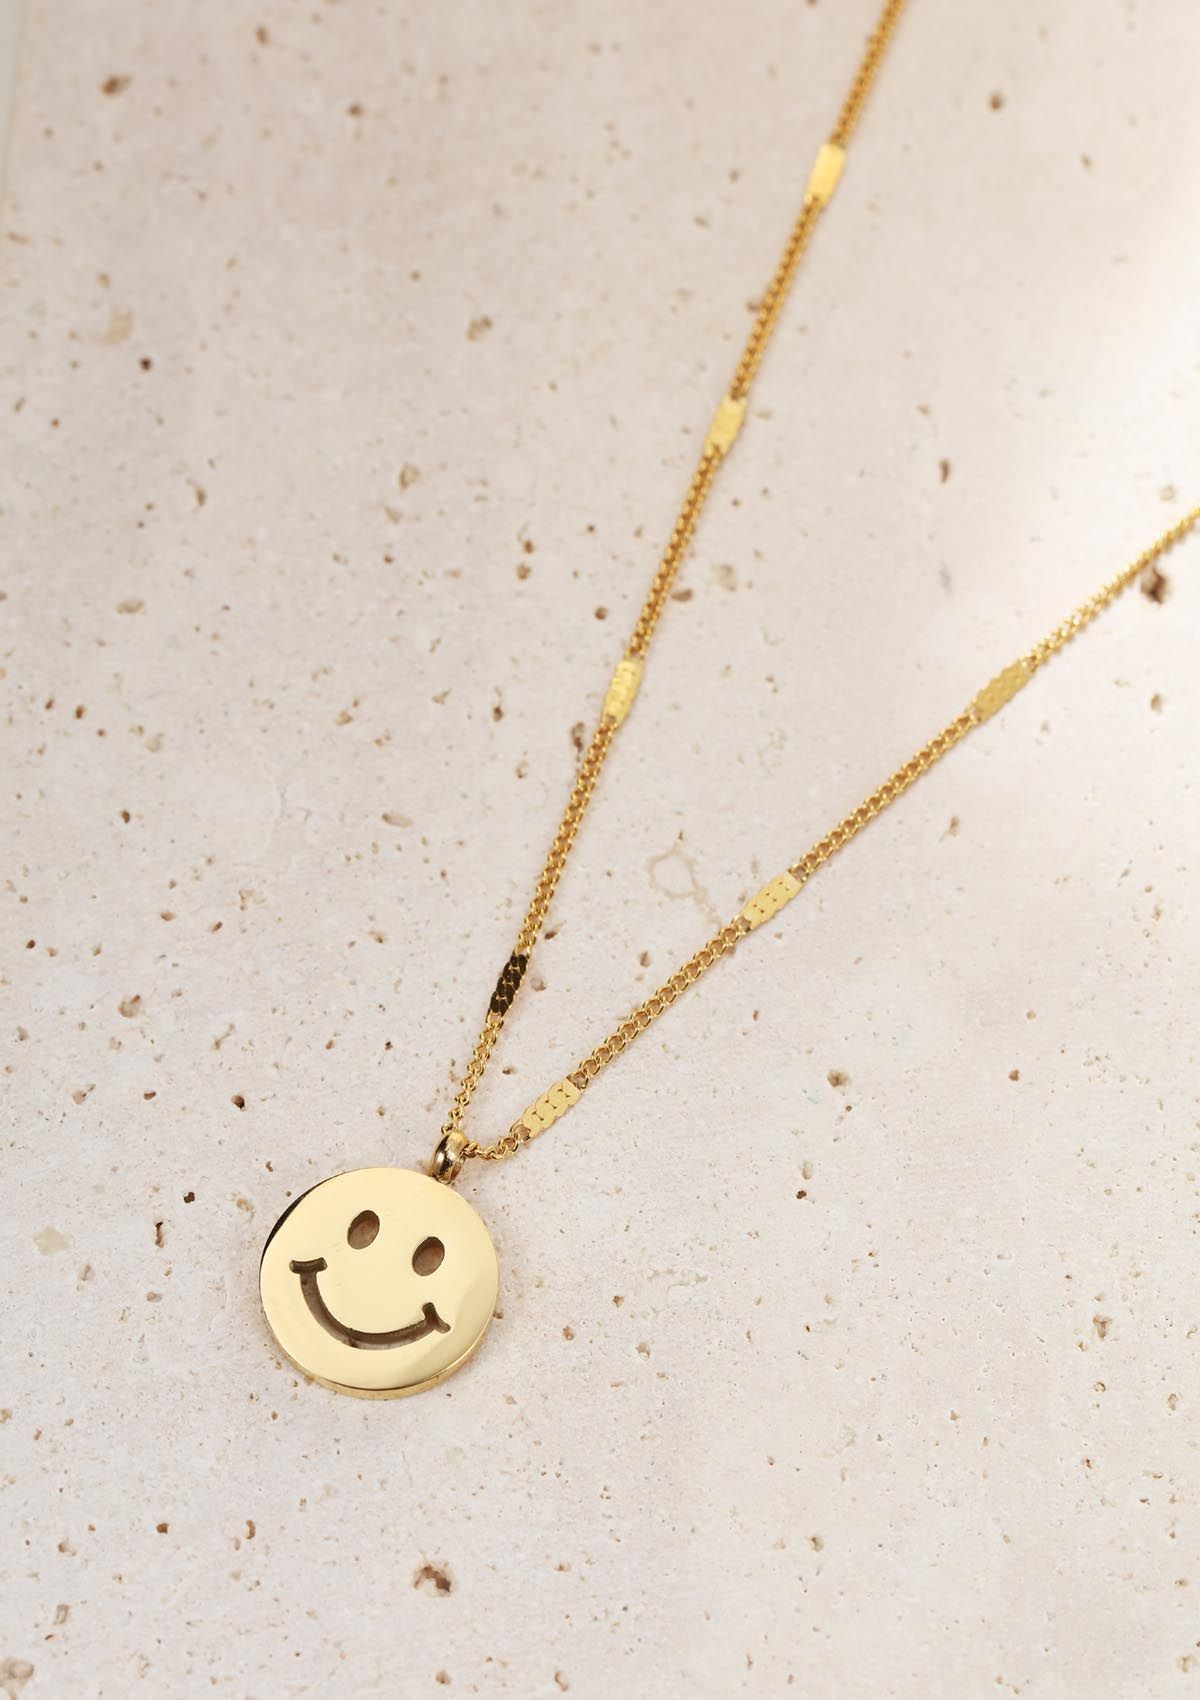 Smiley Face Pendant Necklace Gold